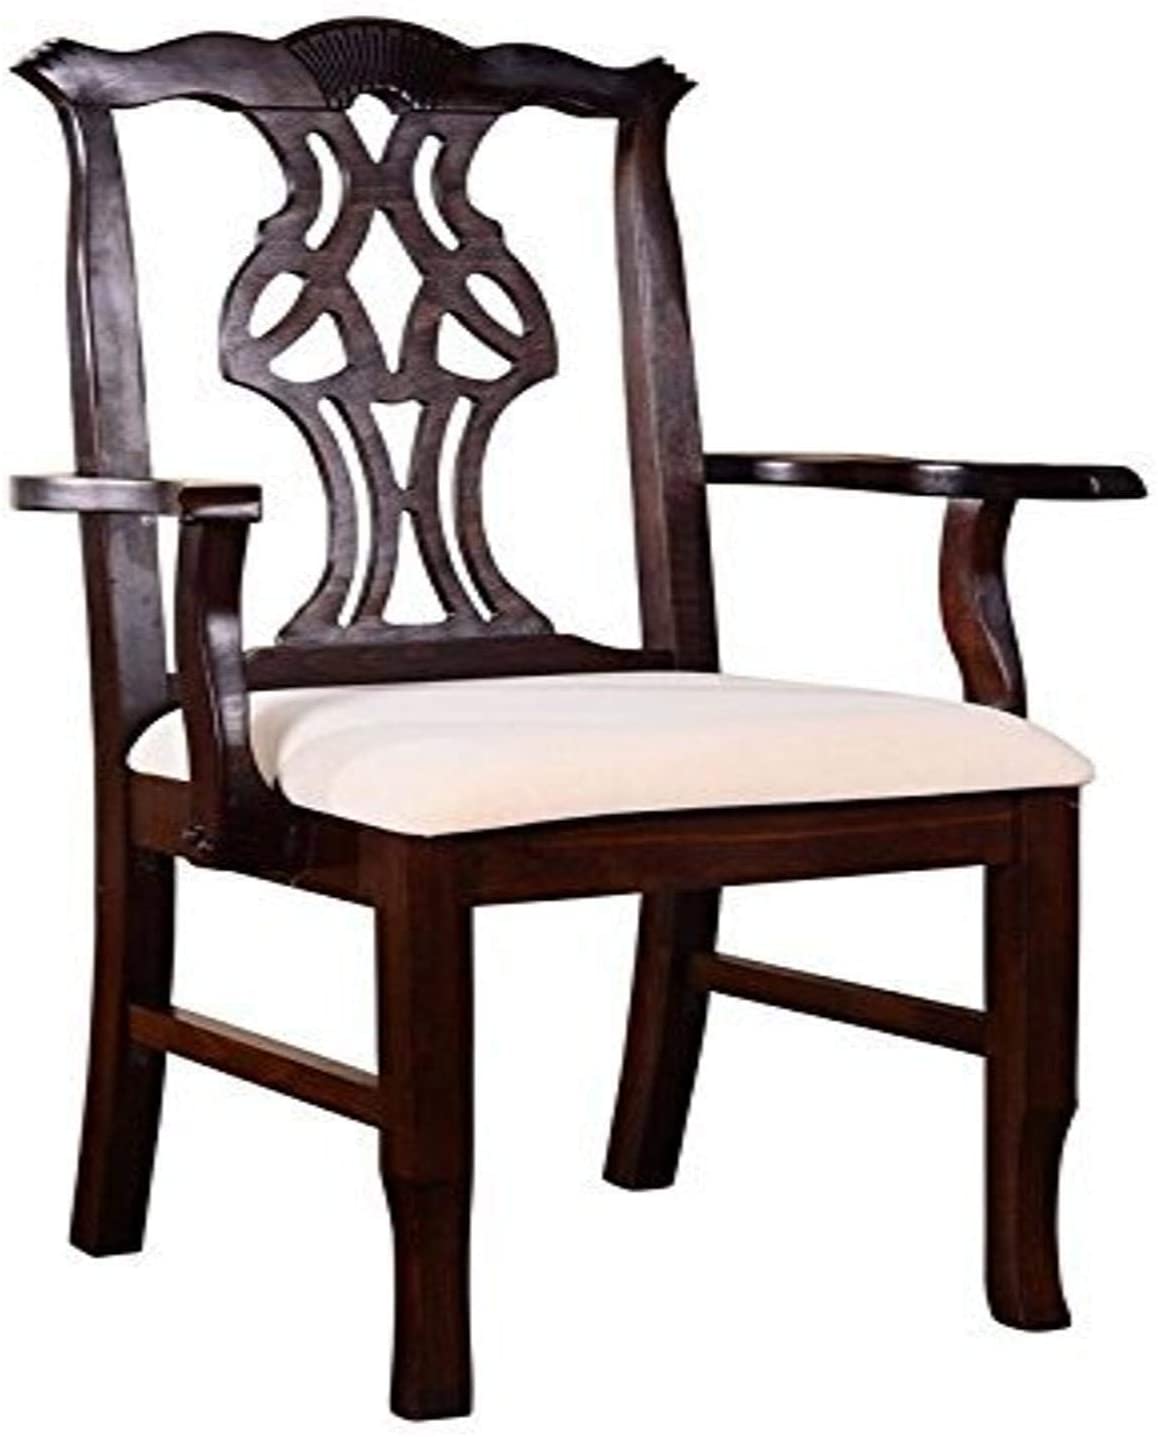 B01N2JKOR9 Beechwood Mountain Bsd-6A-W Solid Beech Wood Arm Chair in Walnut for Kitchen & Dining, NA